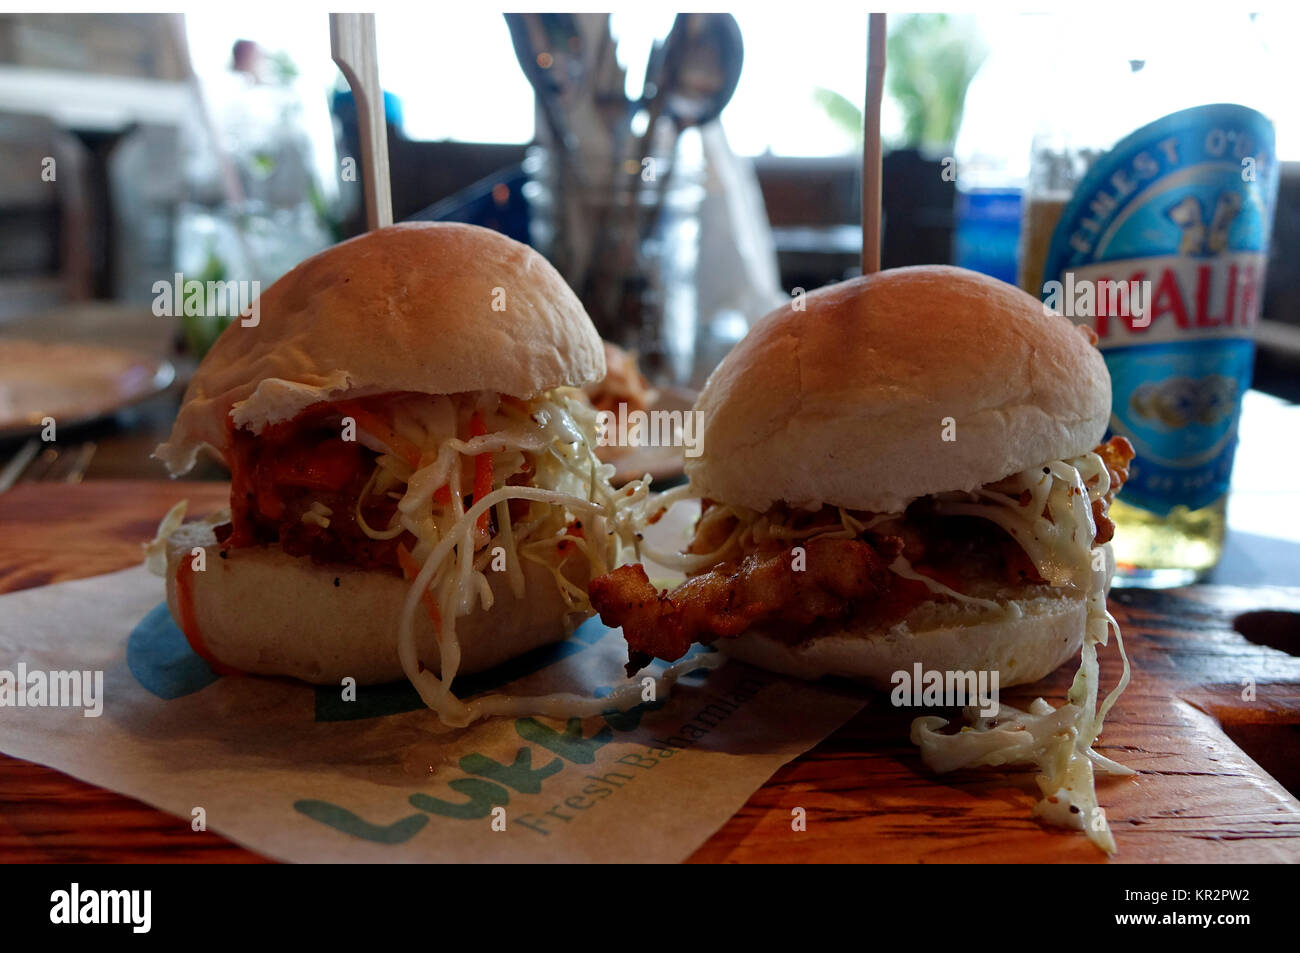 Conch is a mainstay food on the Bahamas and these sliders were delicious. Stock Photo